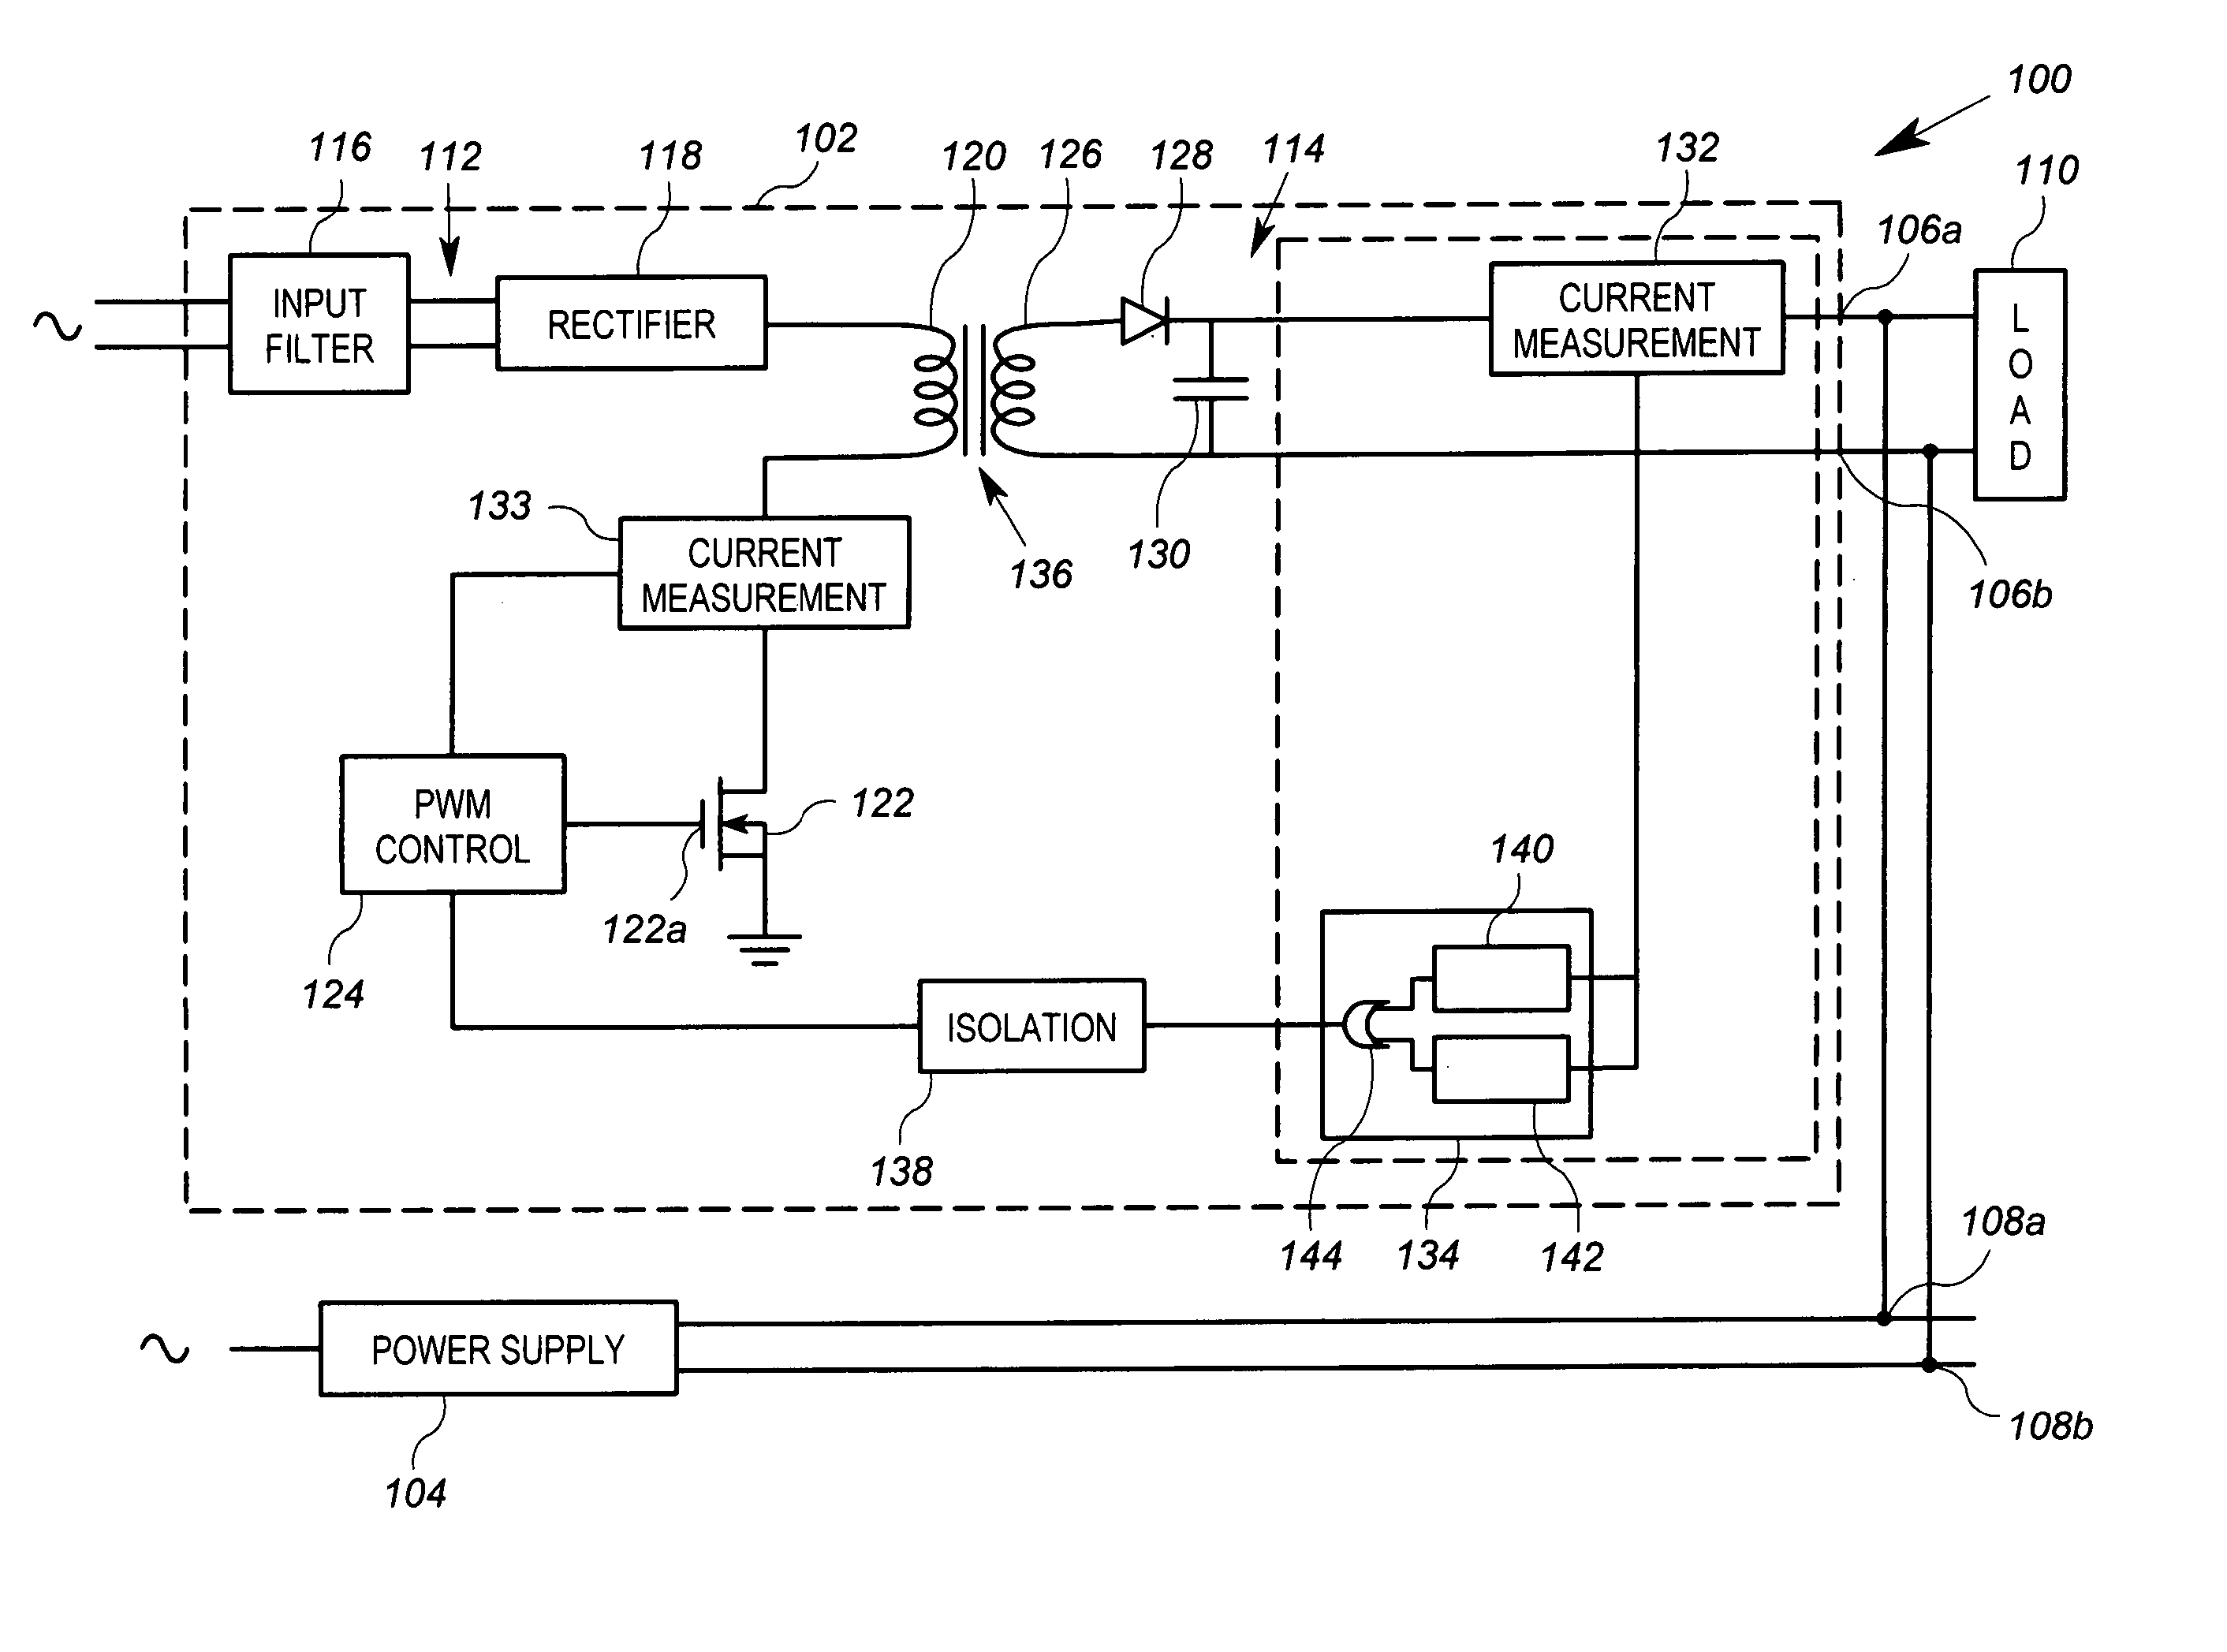 Switching power supply having dual current feedback